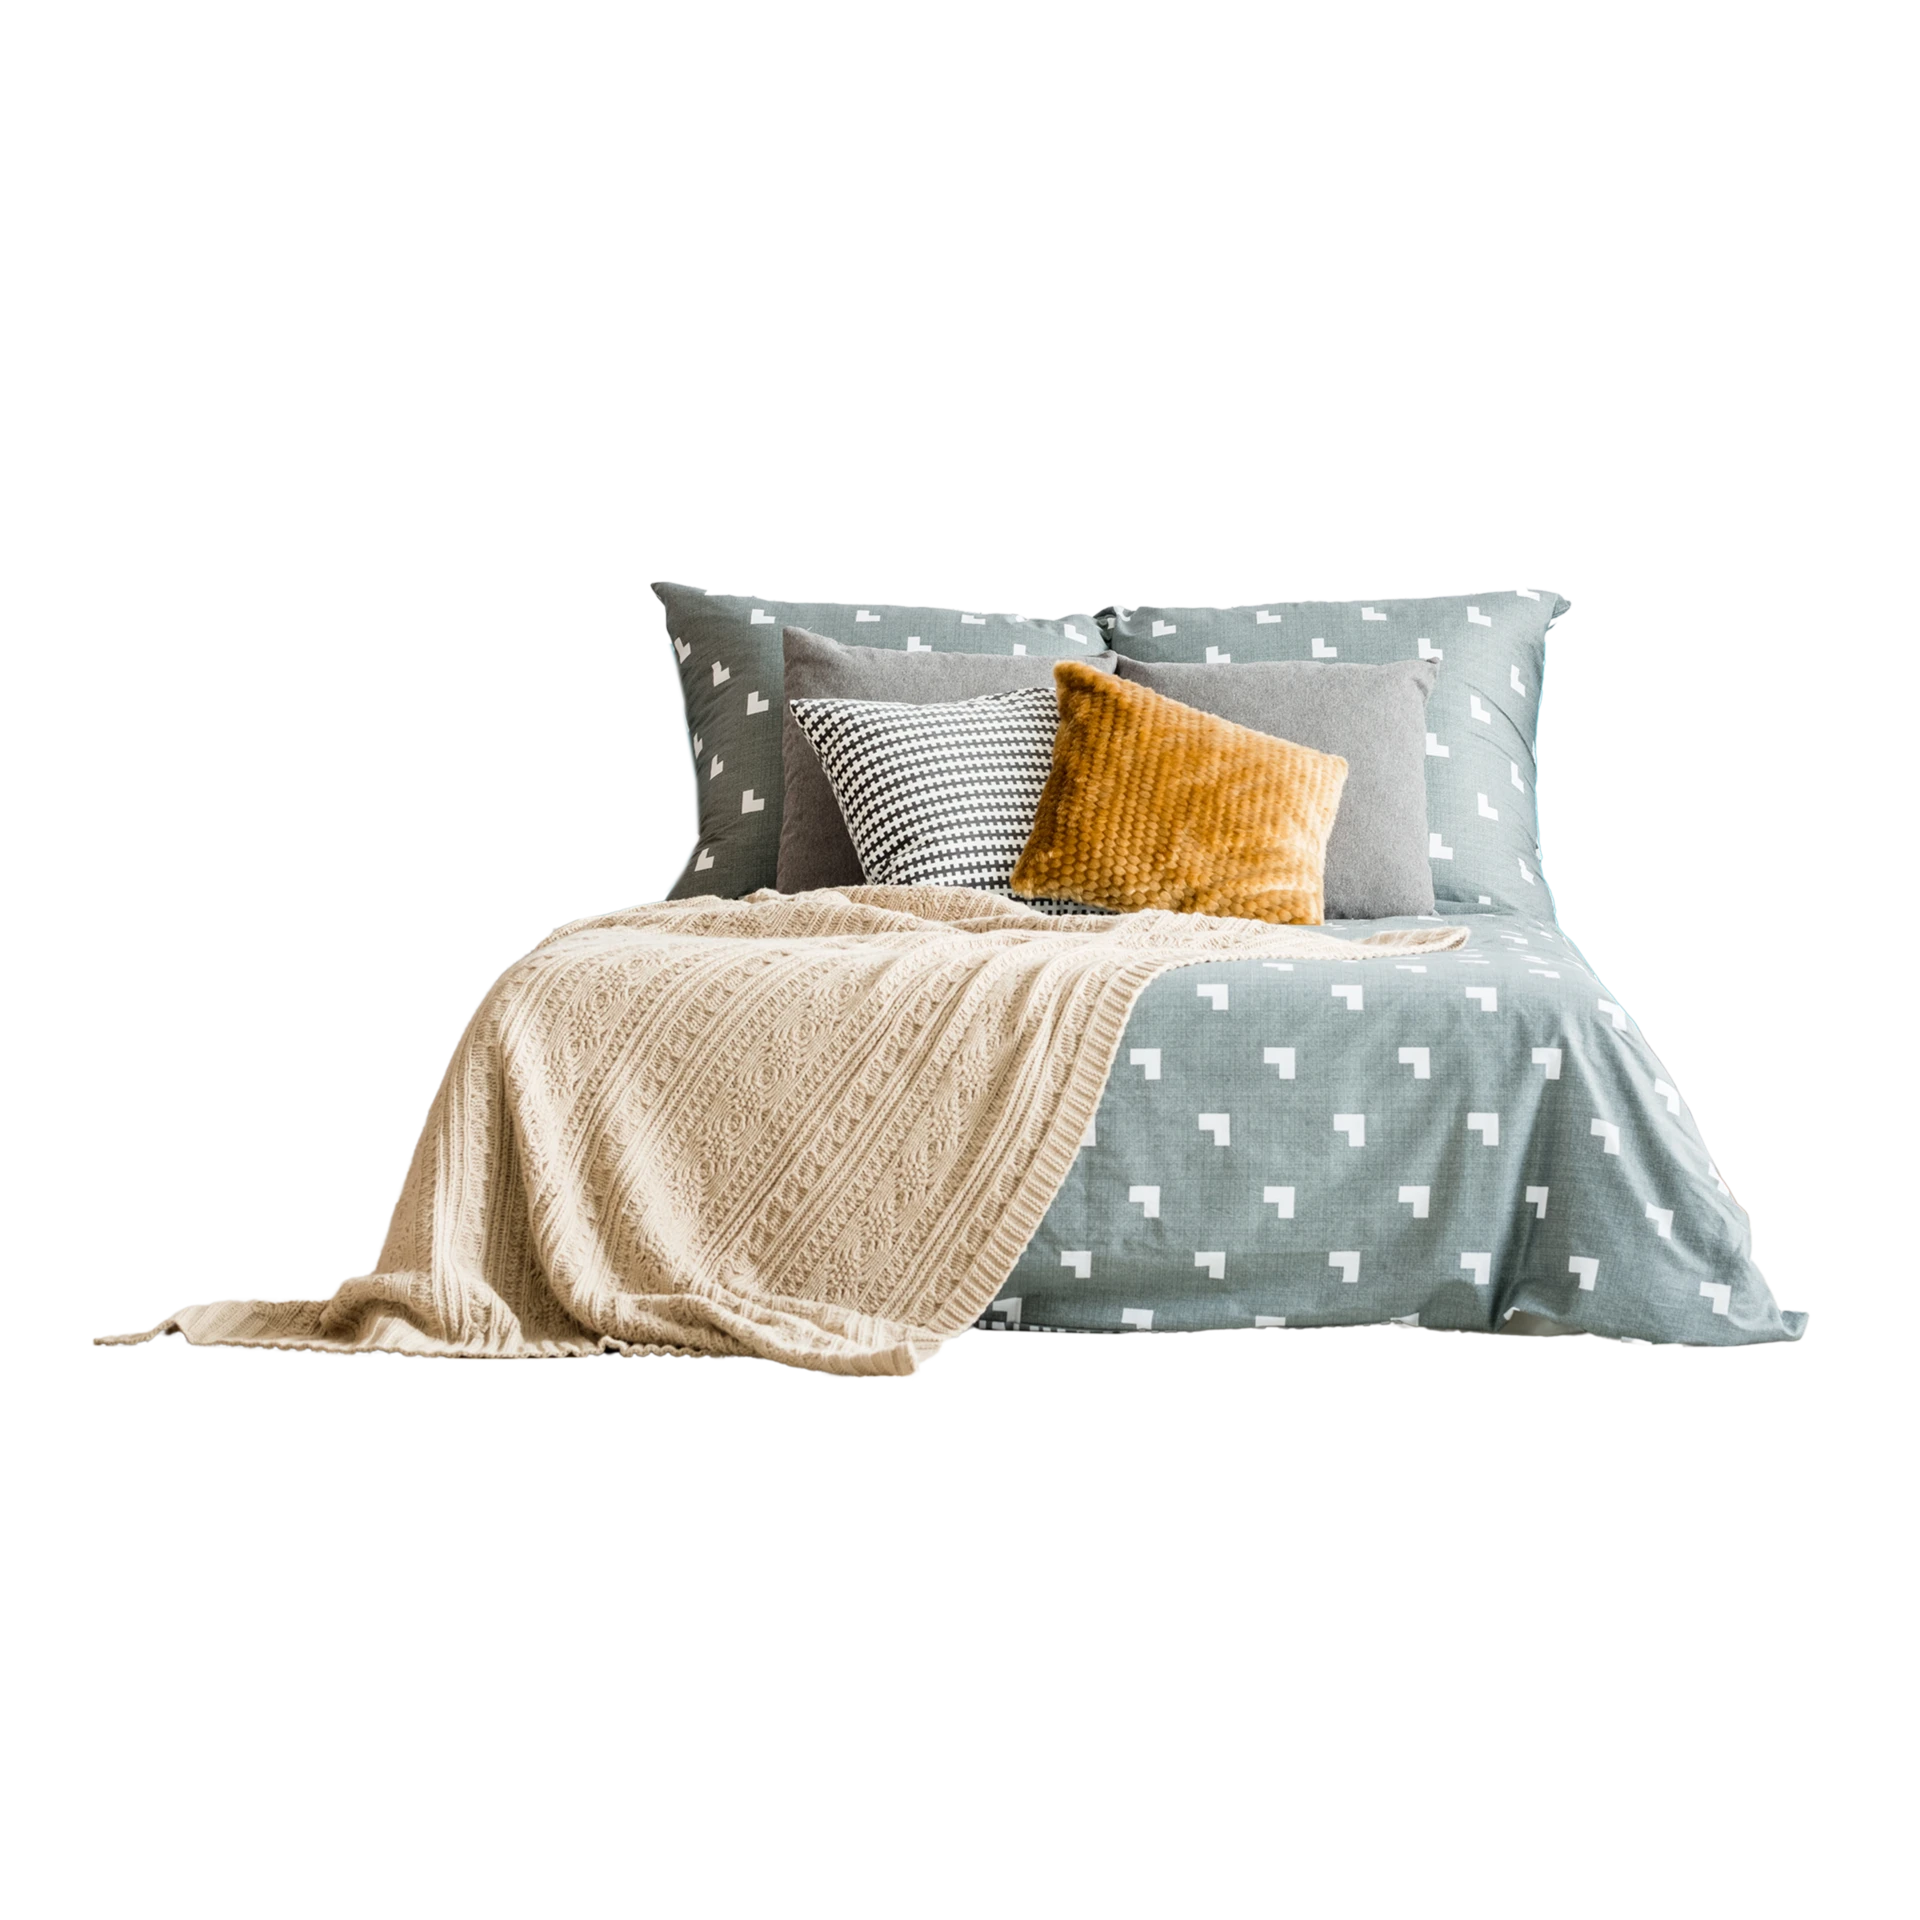 Bed linen - Blankets and Pillows